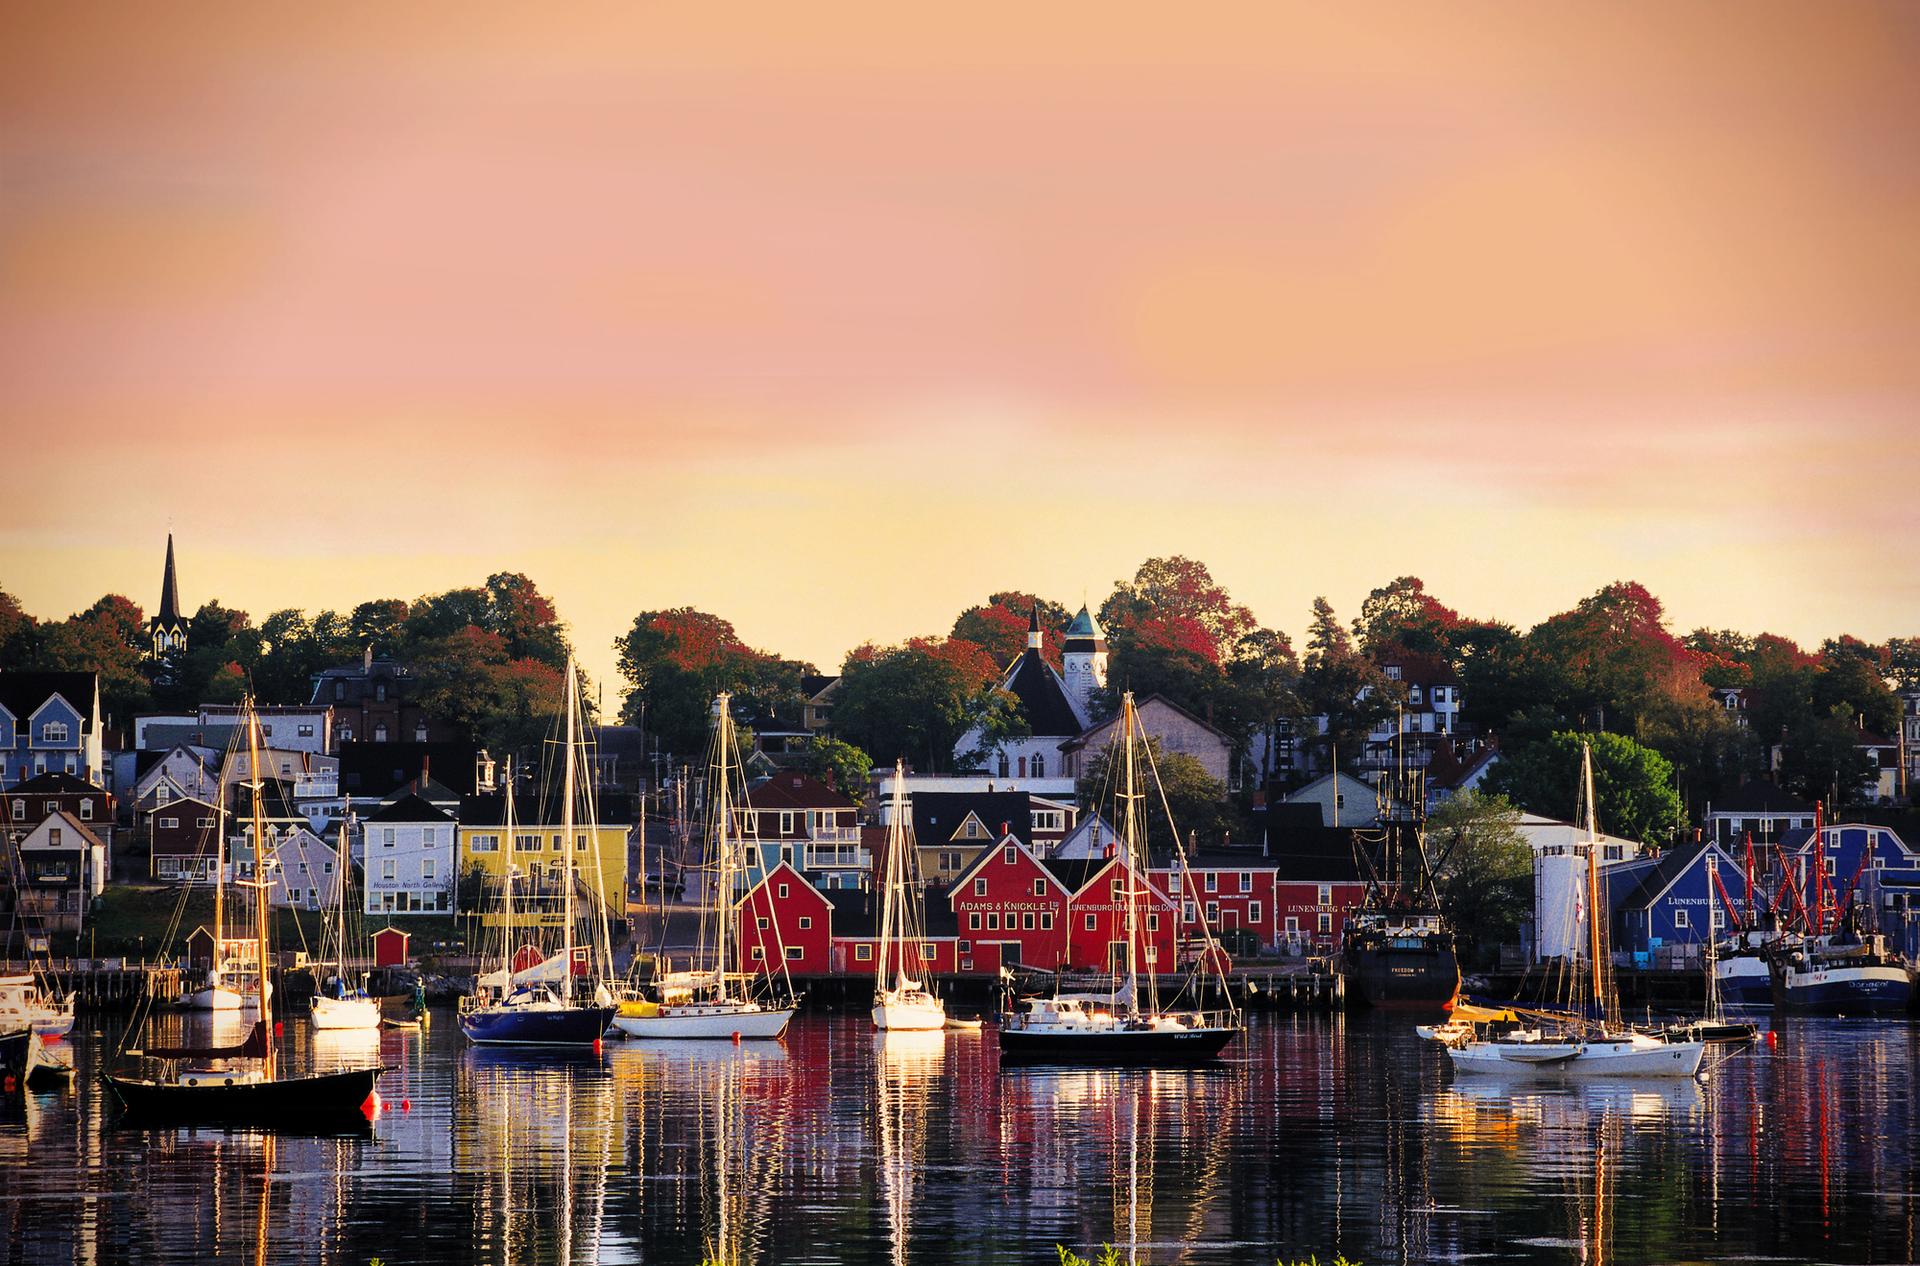 View of homes and boats along the waterfront in Lunenburg County, Nova Scotia